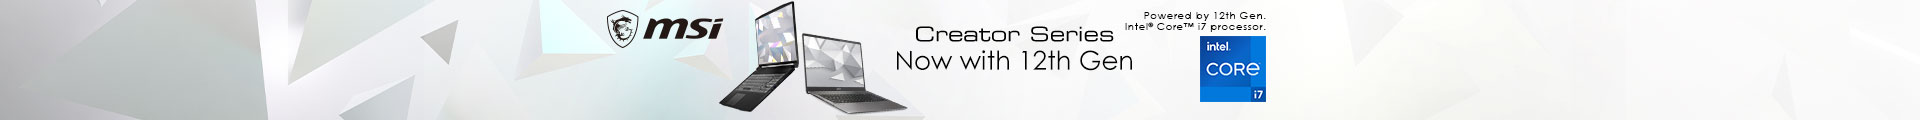 Creator Series Now with 12th Gen